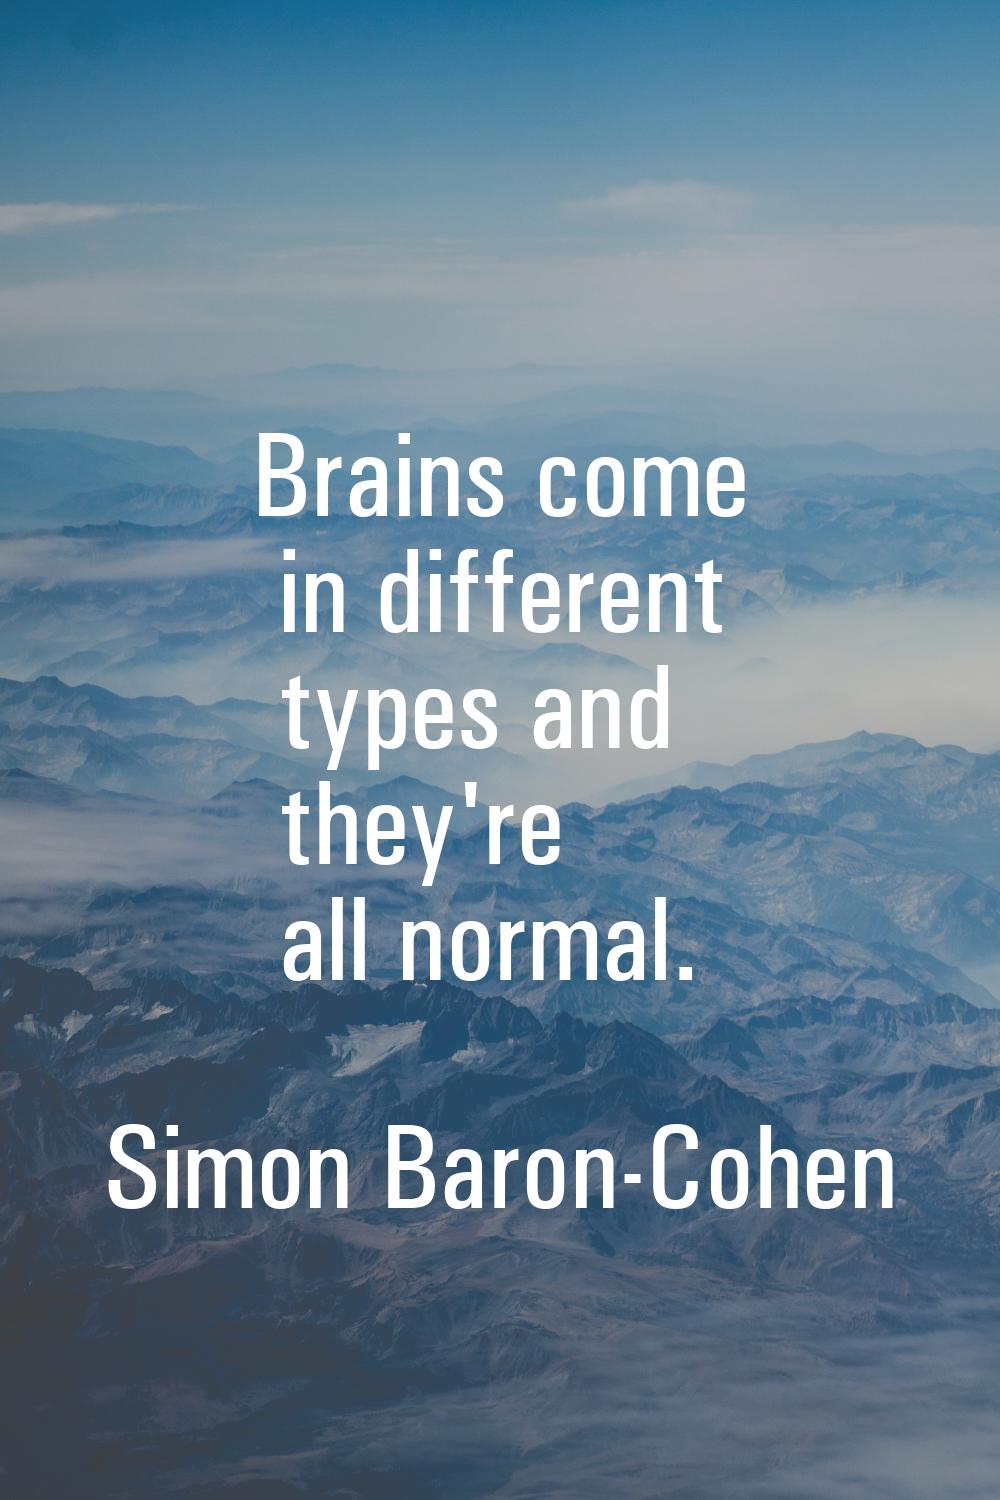 Brains come in different types and they're all normal.